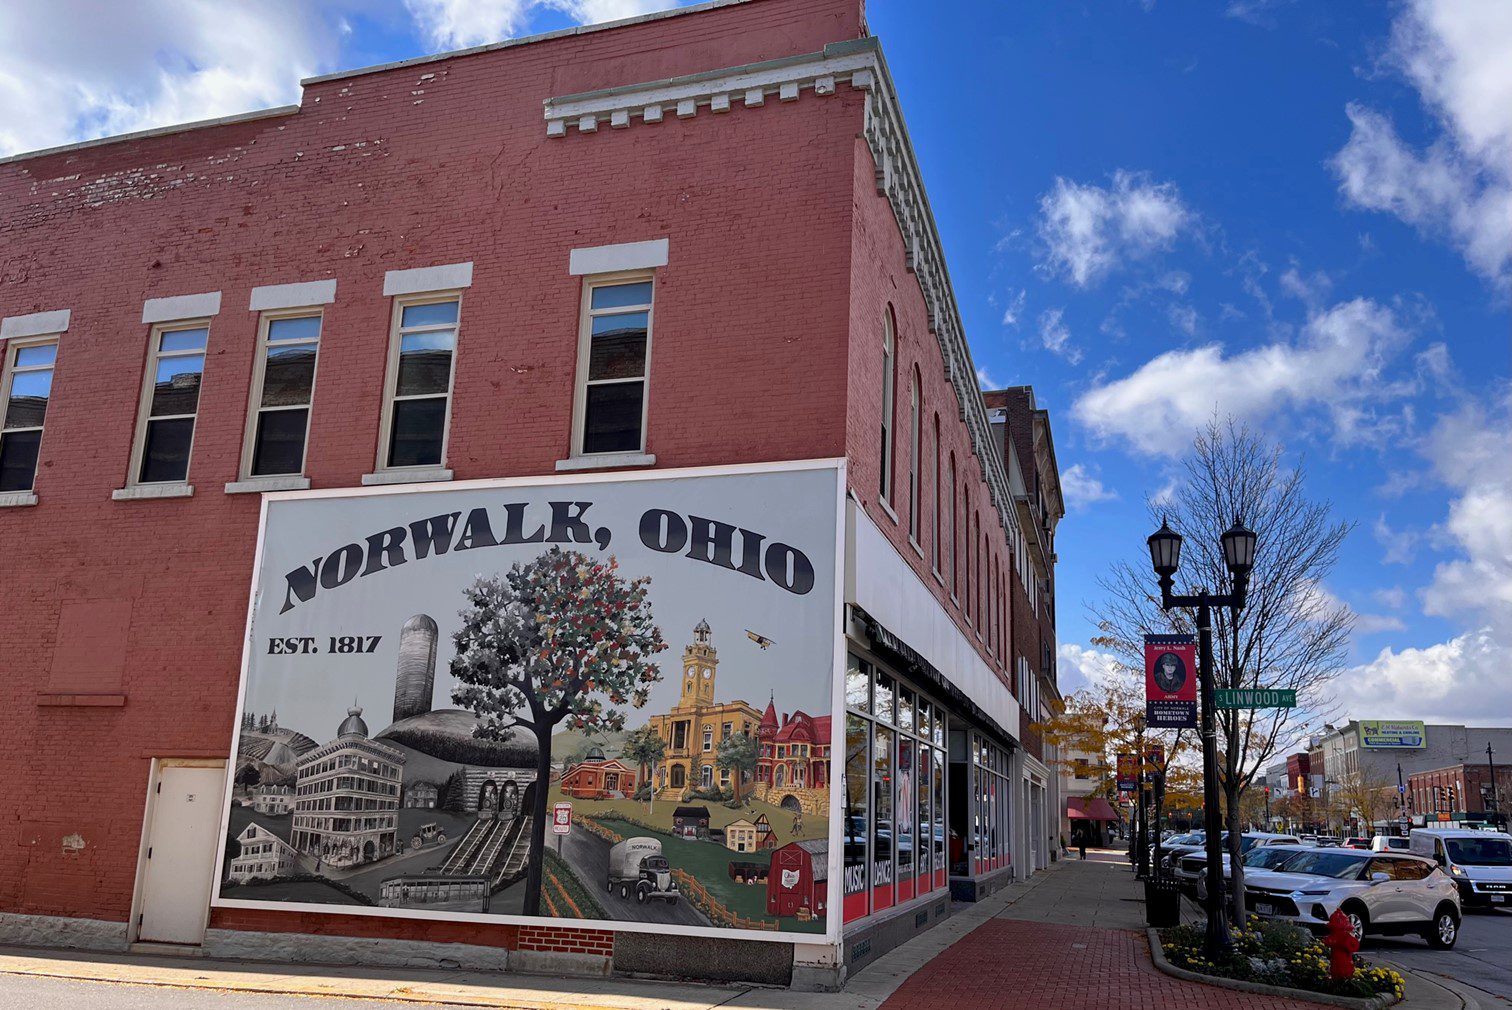 The corner of a two-story brick building has a mural of how the town looked in 1817 and how it looks today.